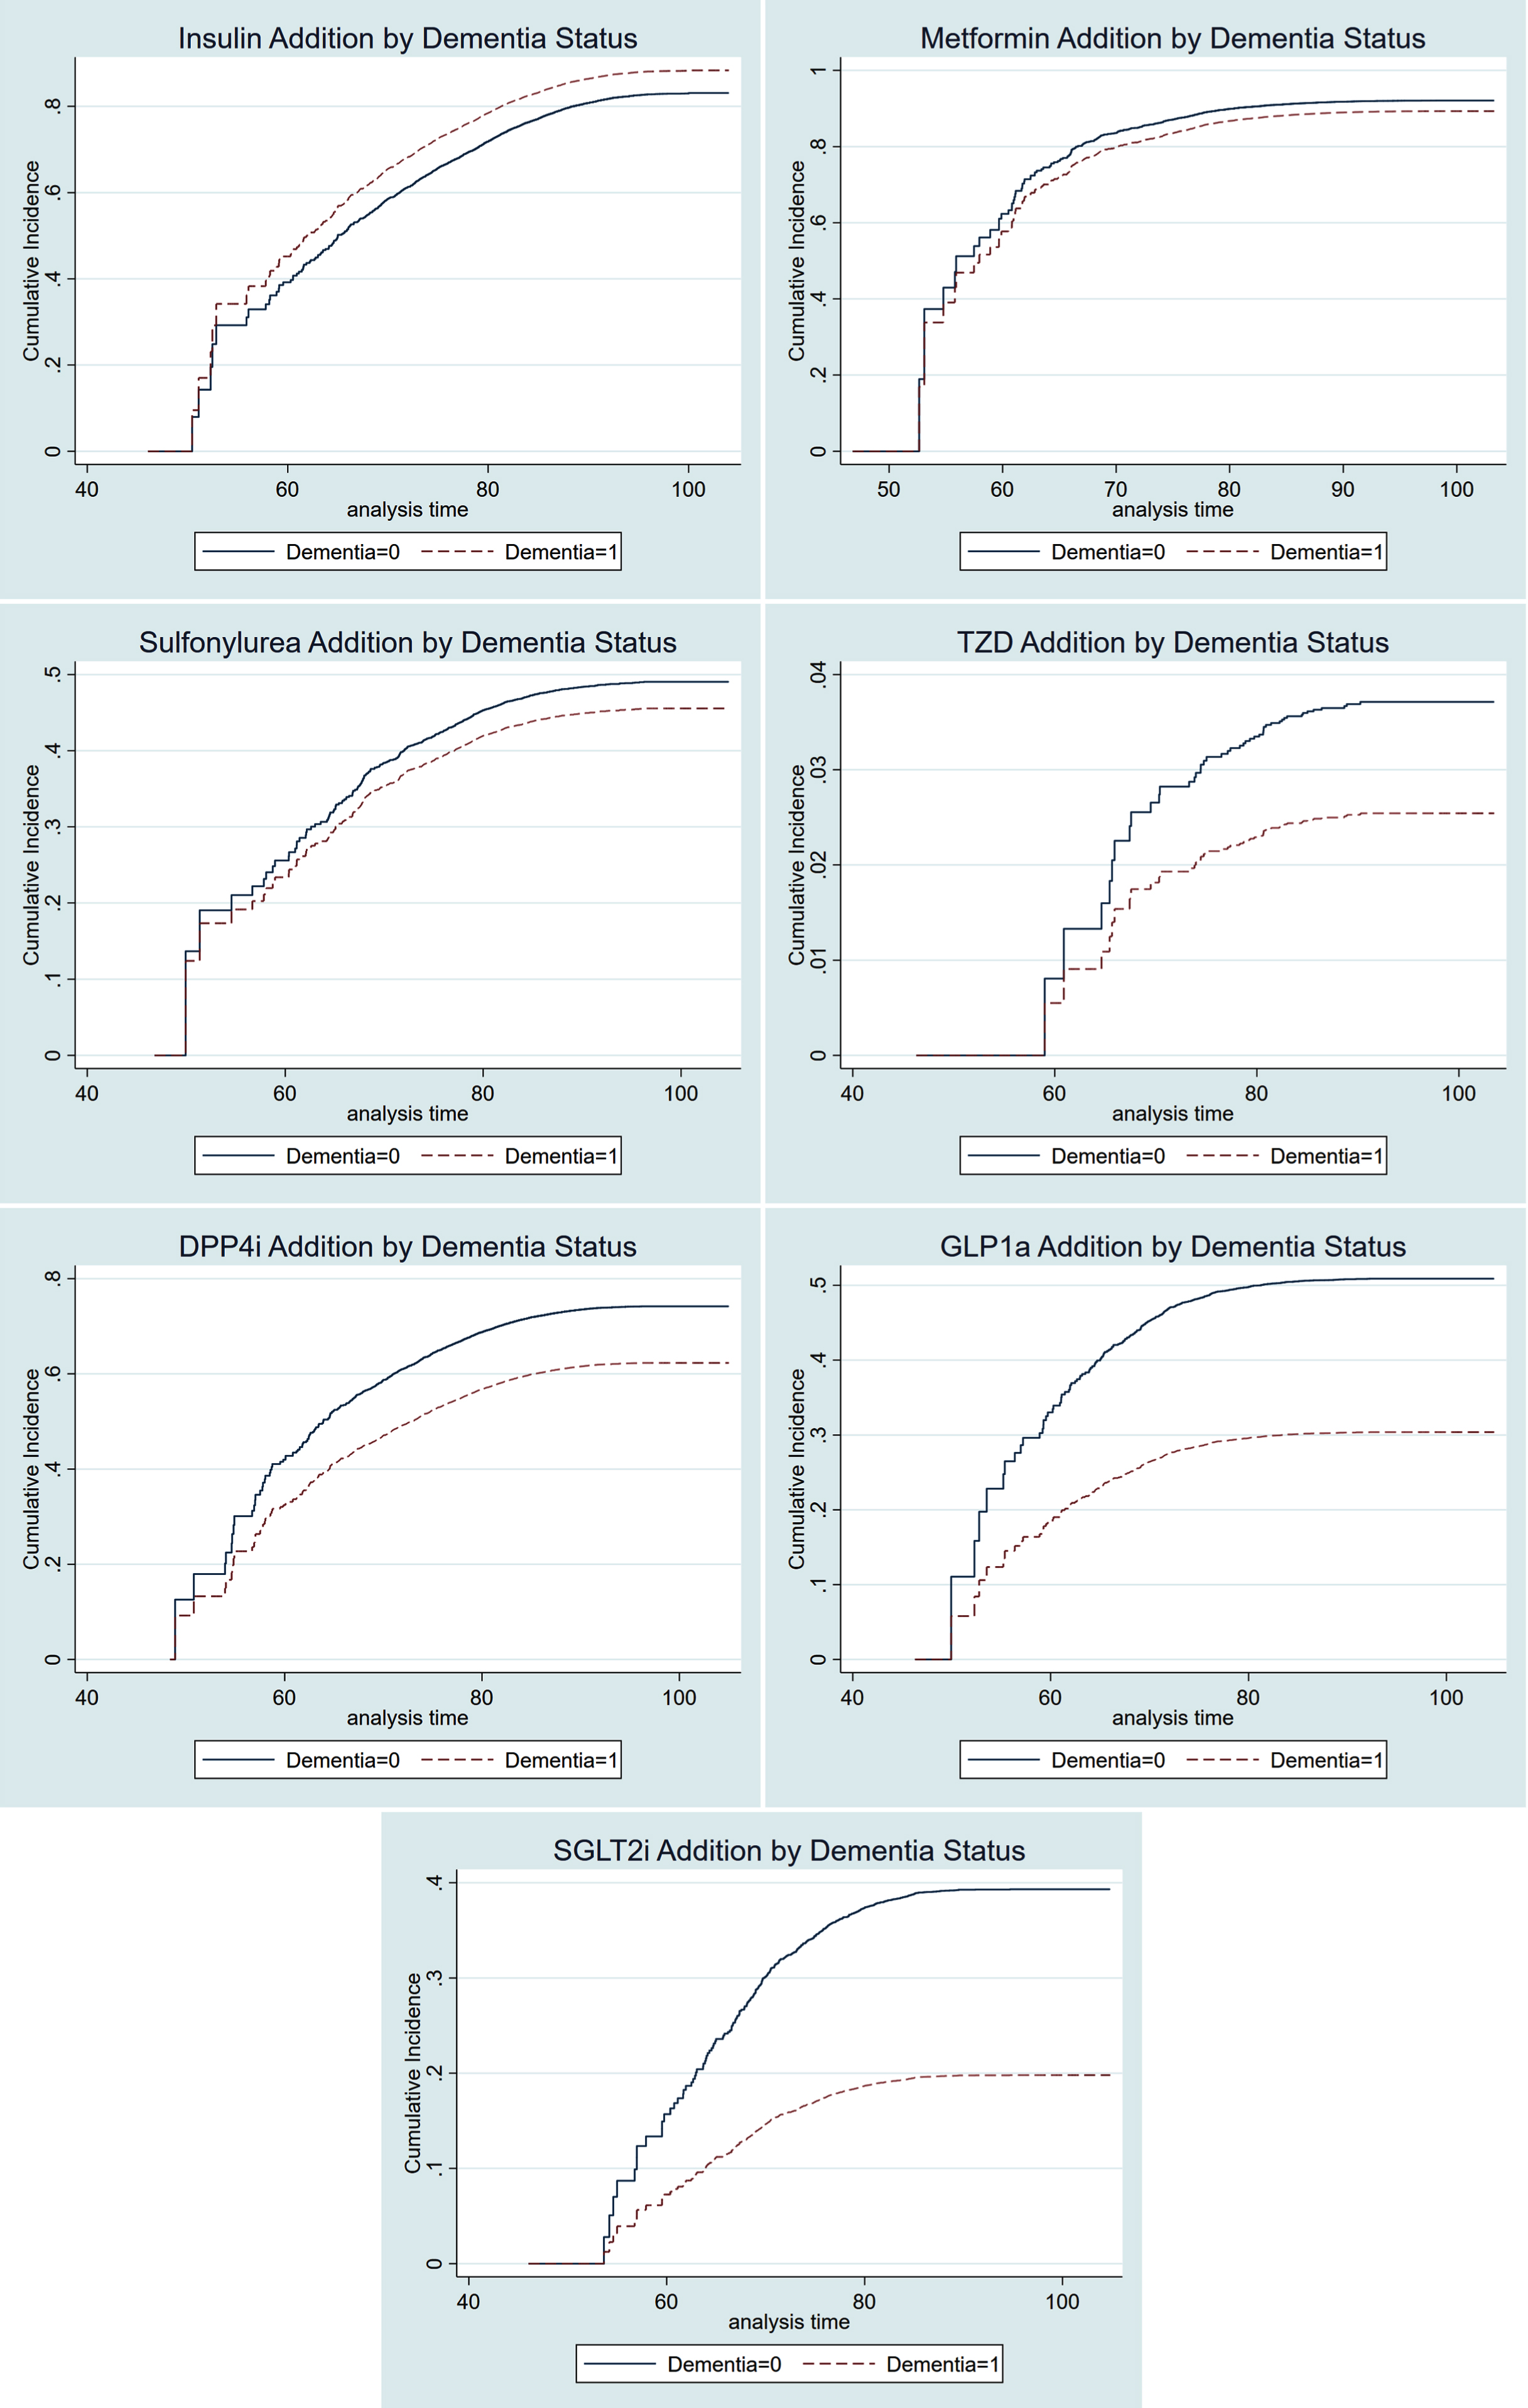 Cumulative incidence functions of antidiabetic drug dispensation in naïve users by dementia status. TZD, thiazolidinediones; DPP-4i, dipeptidyl-peptidase-4 inhibitors; GLP-1a, glucagon-like peptide-1 agonists; SGLT-2i, sodium-glucose cotransporter-2 inhibitors; Curves are based on PS-matched competing risk analyses.